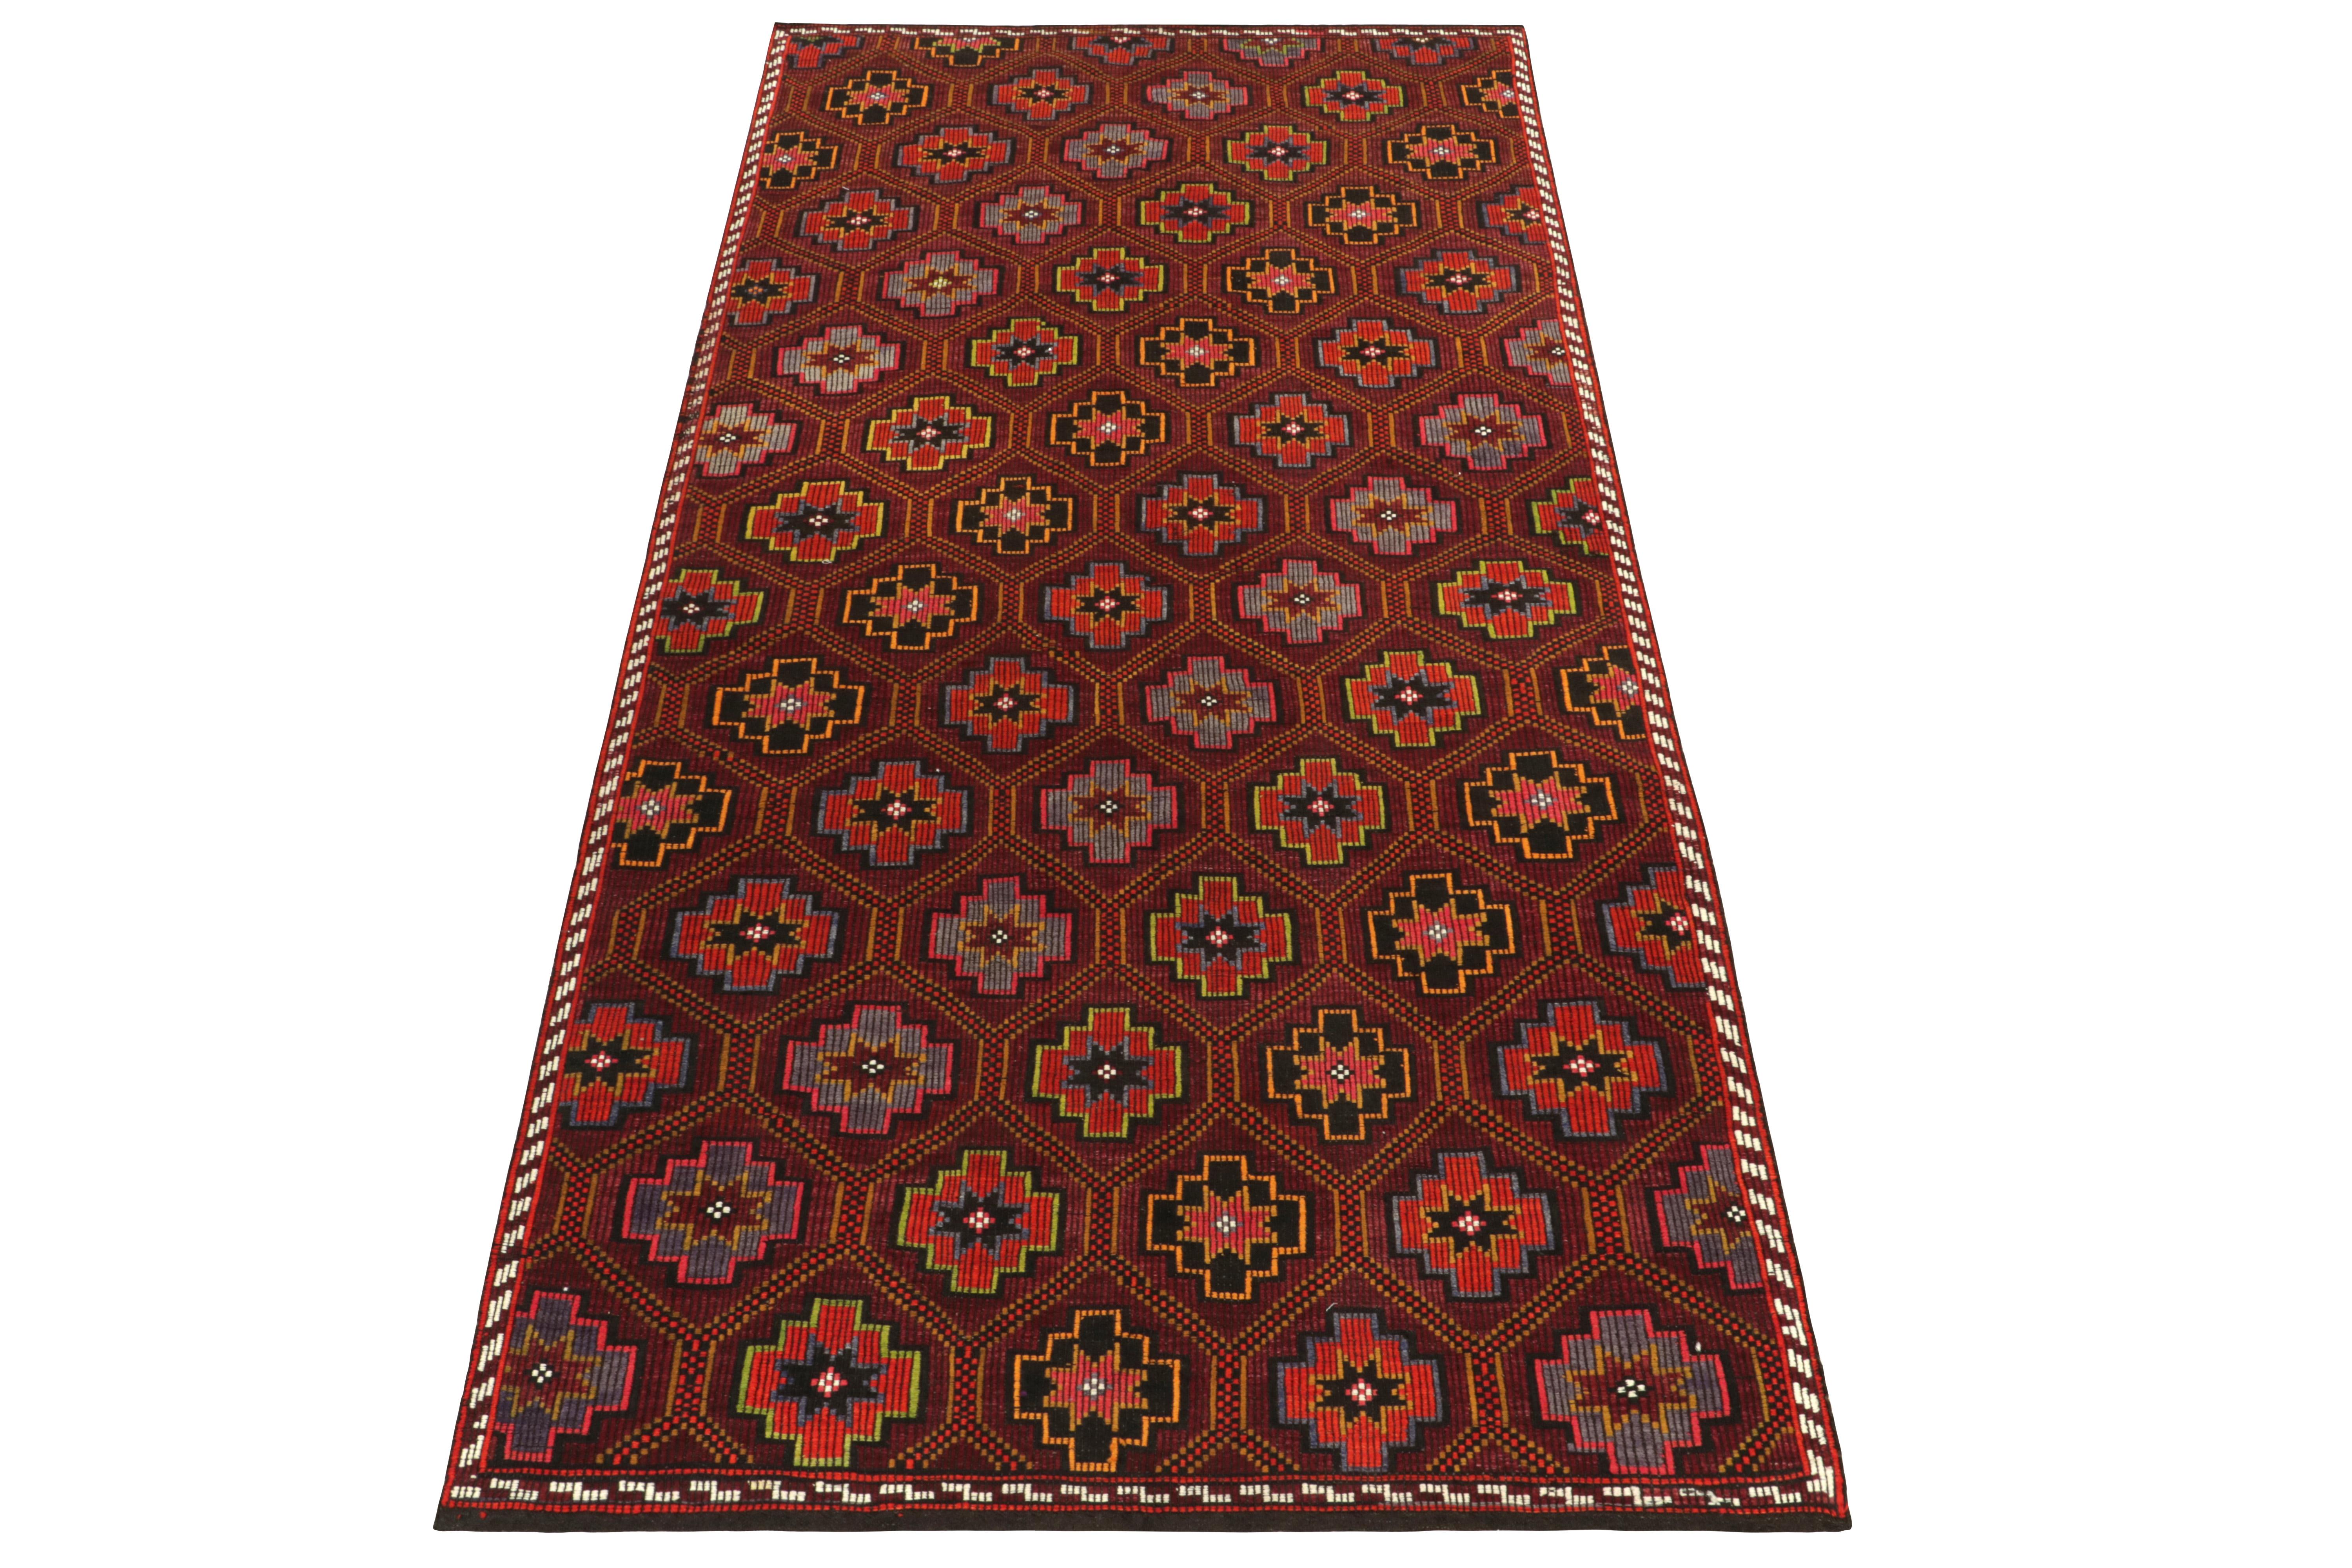 Among the celebrated vintage styles, this 6x12 Chaput kilim rug enjoys a special place in our flatweave collection. This particular handwoven rug from Turkey enjoys impeccable embroidery & detailing in rich red, gold & beige-brown with deep blacks